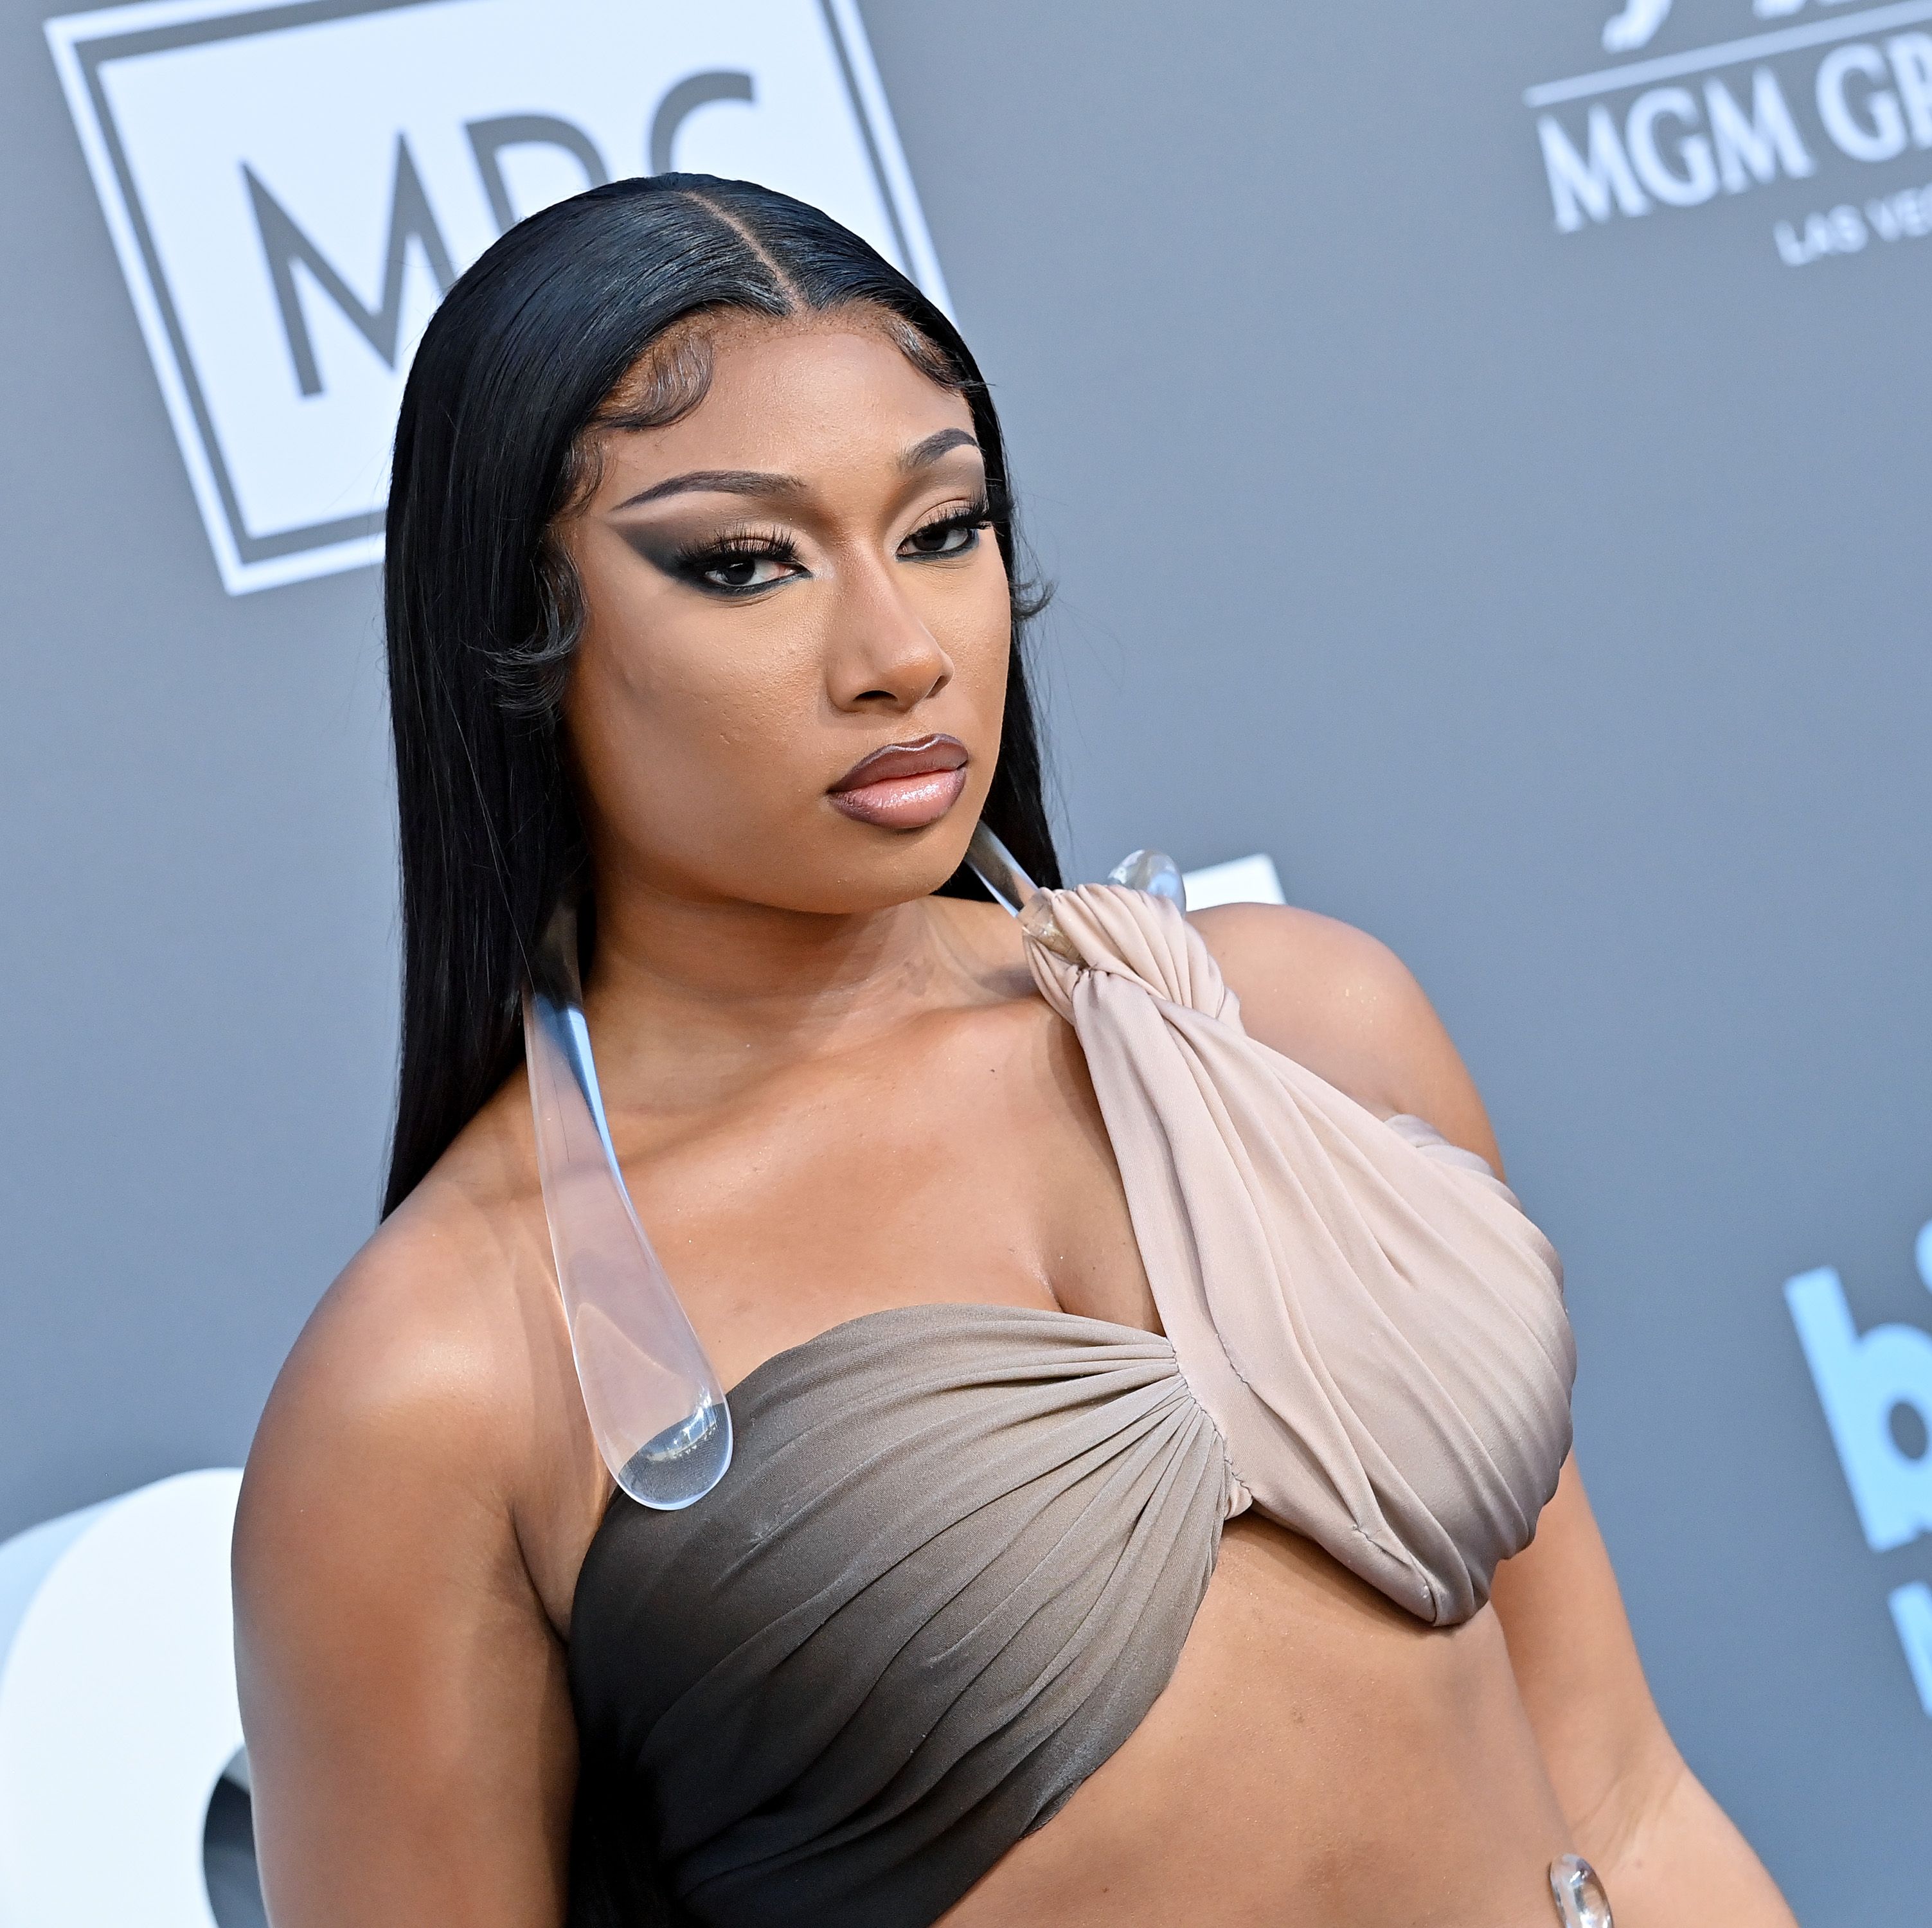 Megan Thee Stallion On Becoming the 